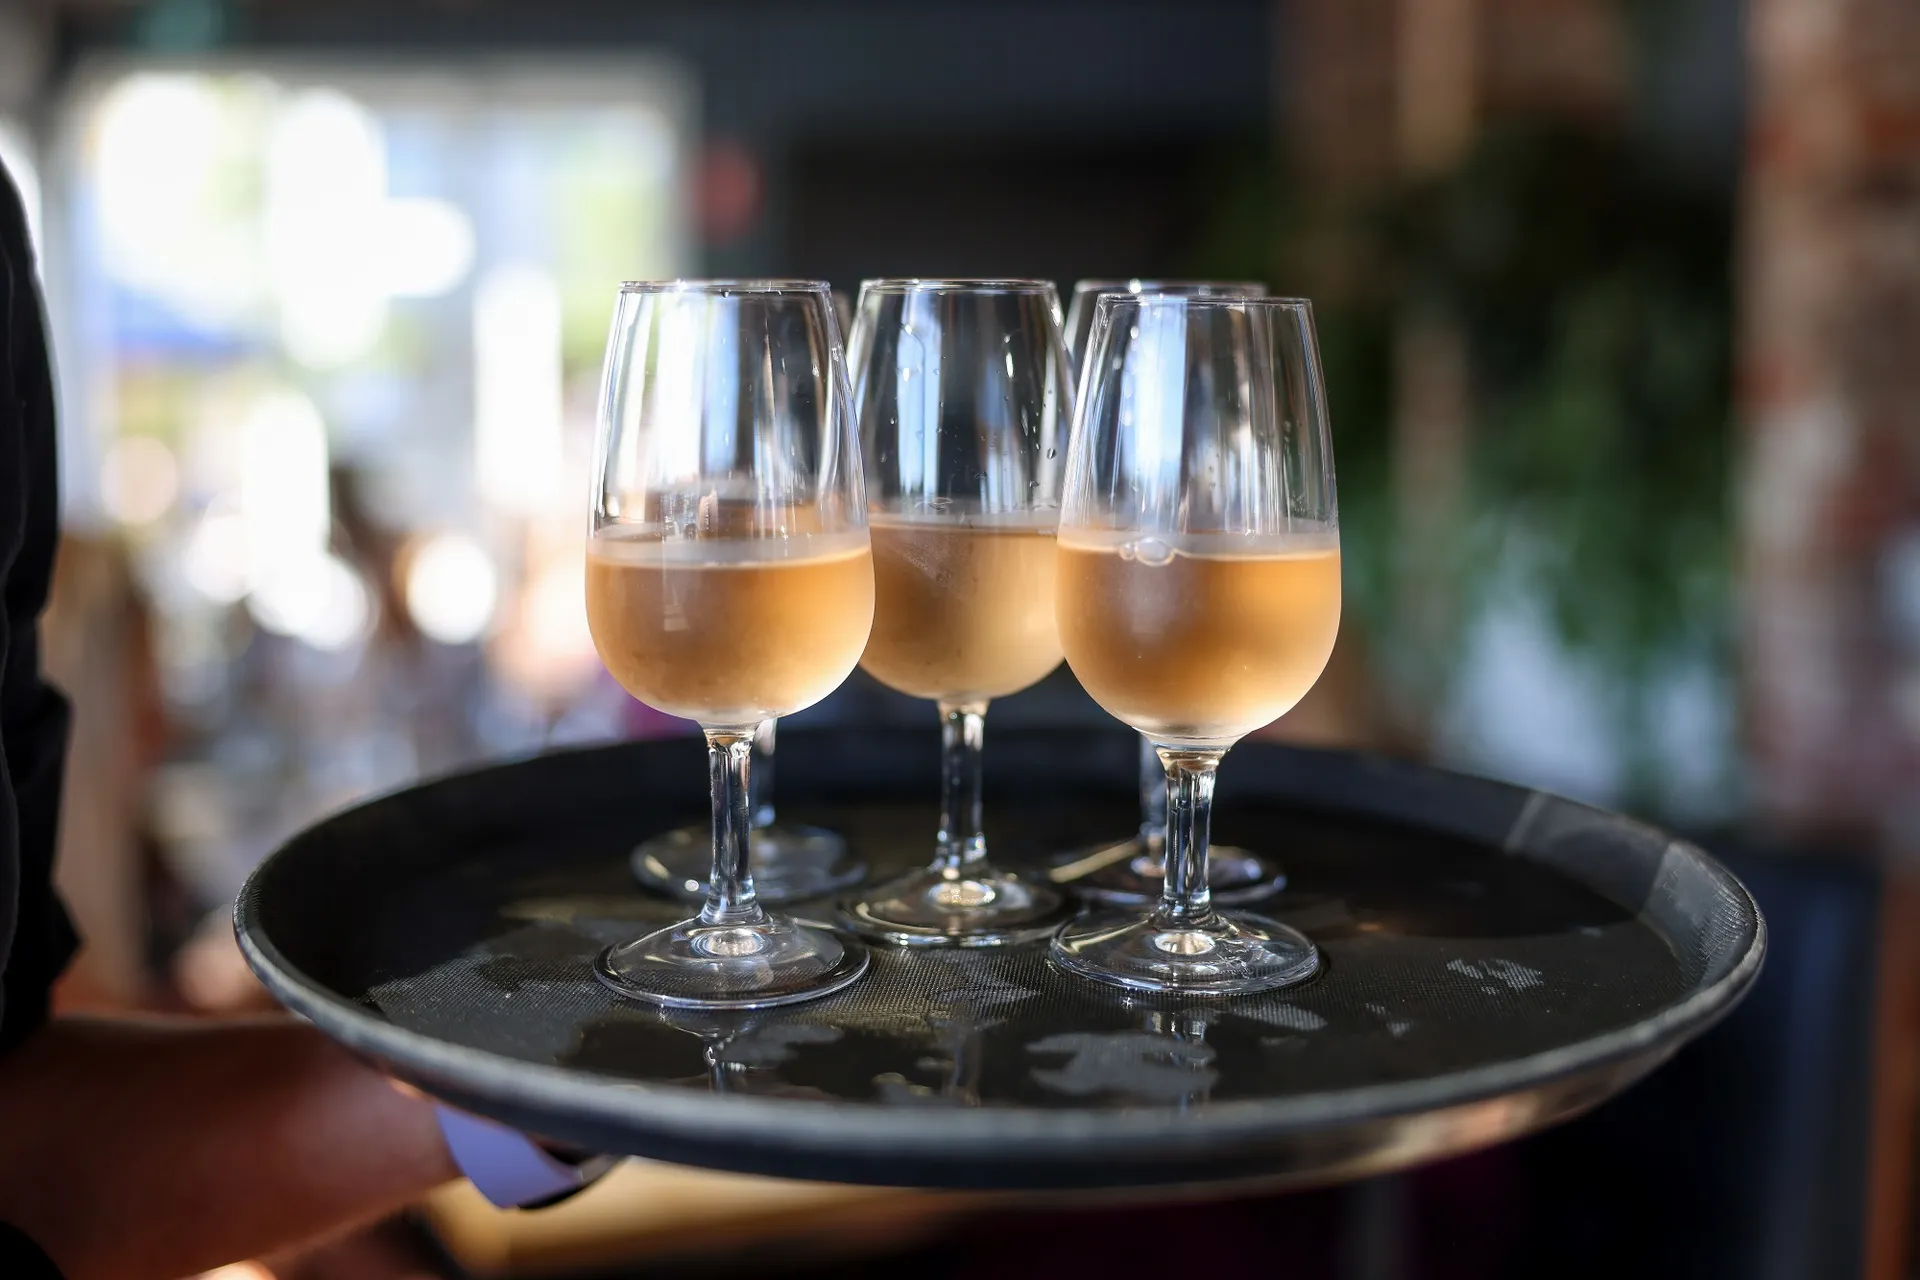 Tray of 3 glasses of wine being served for The Curated Plate 2023